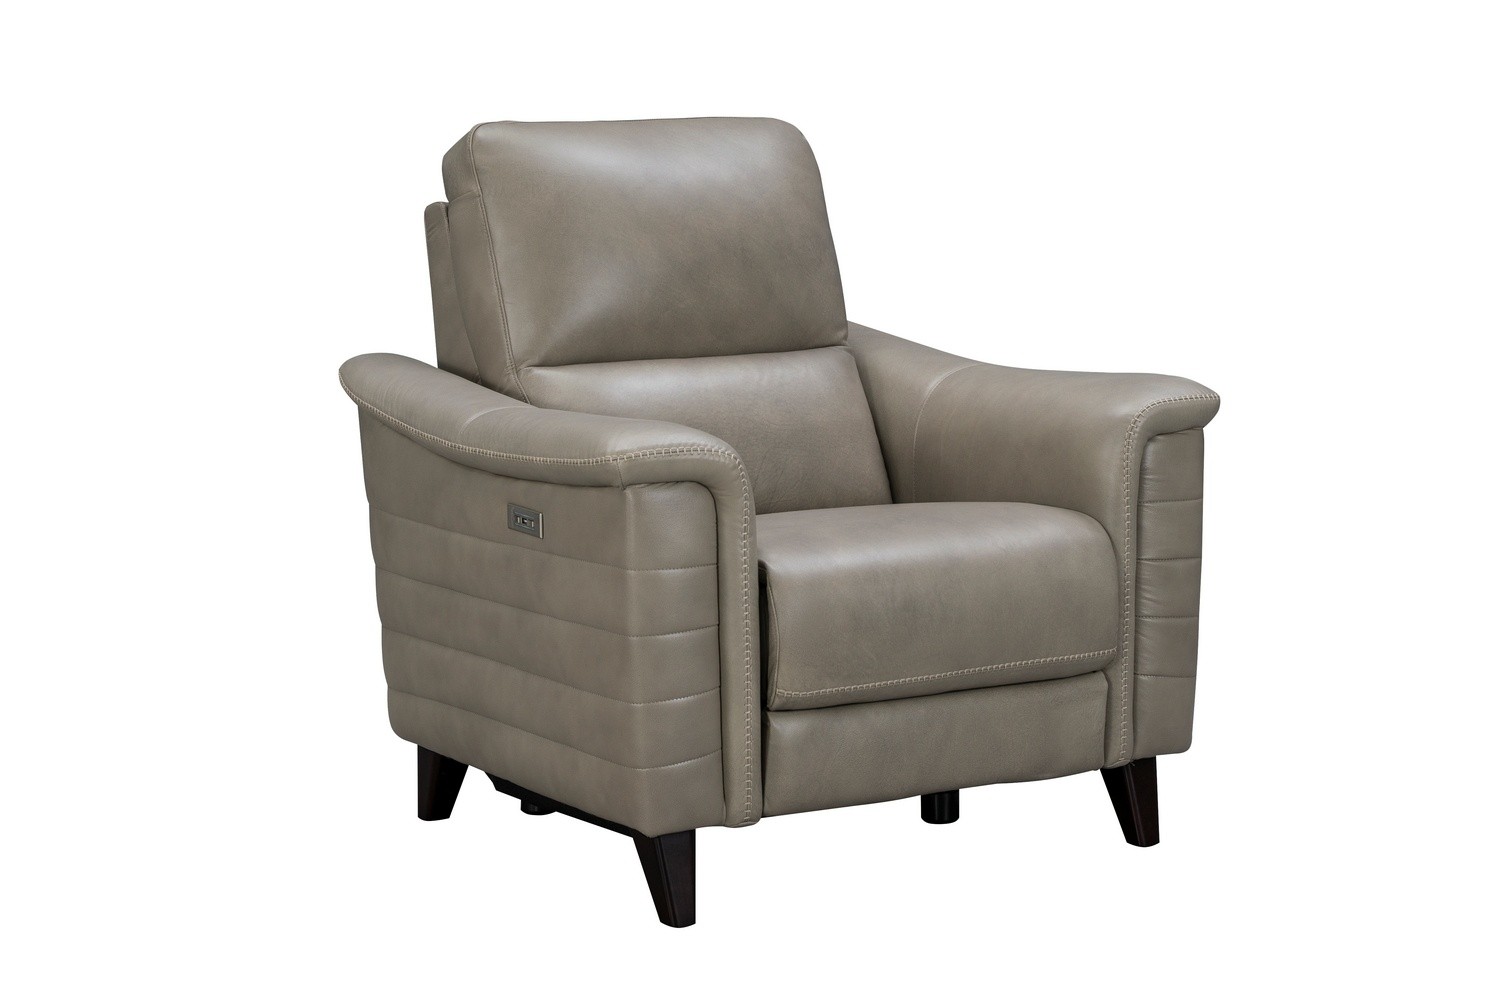 Barcalounger Malone Power Recliner Chair with Power Head Rest - Sergi Gray Beige/Leather Match